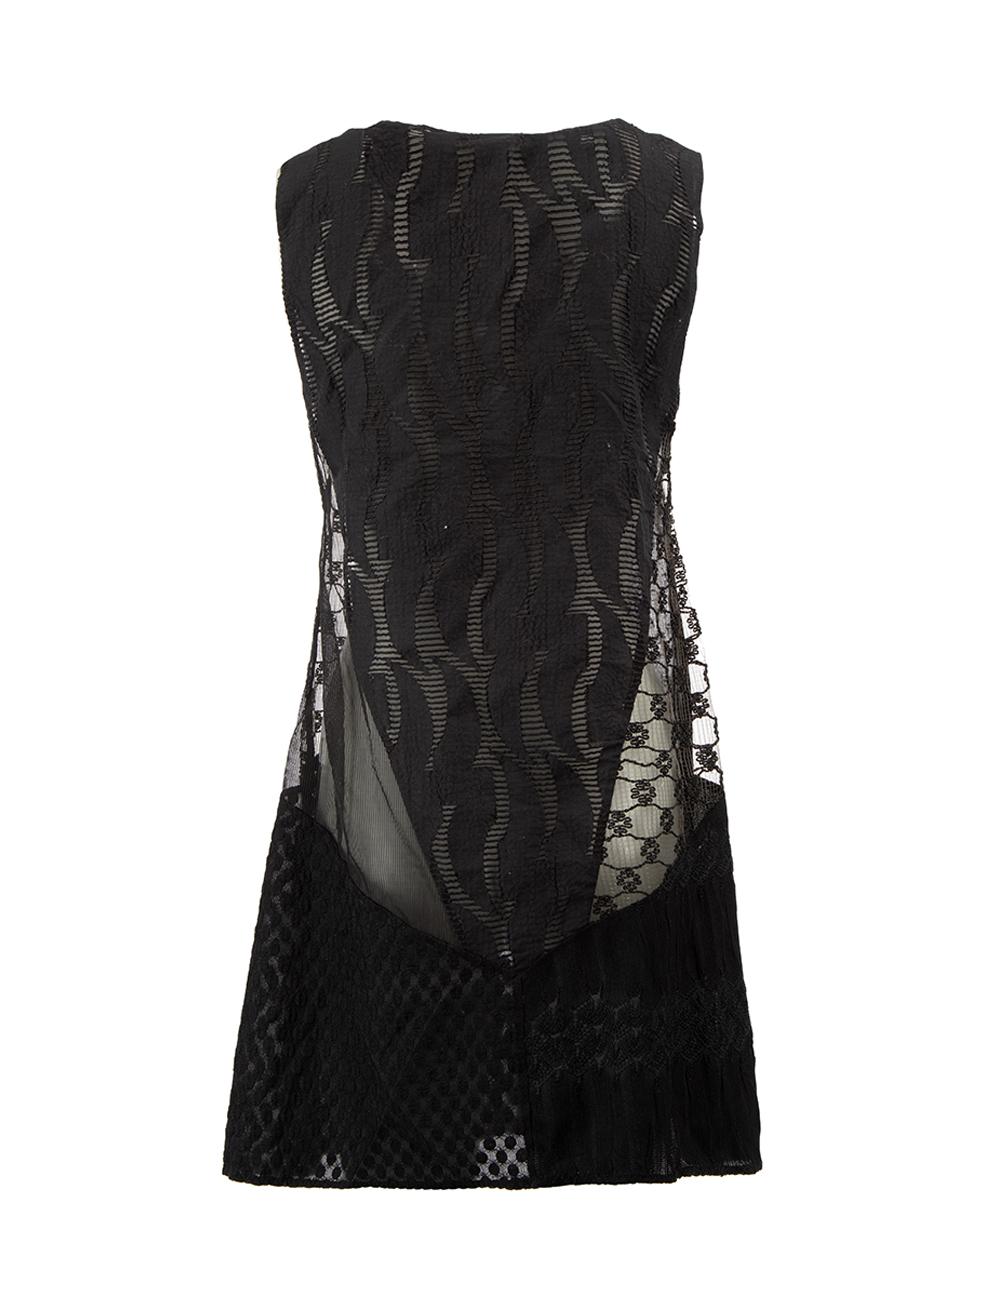 Pre-Loved Missoni Women's Black Plastic Bead Panel Lace Dress In Excellent Condition For Sale In London, GB